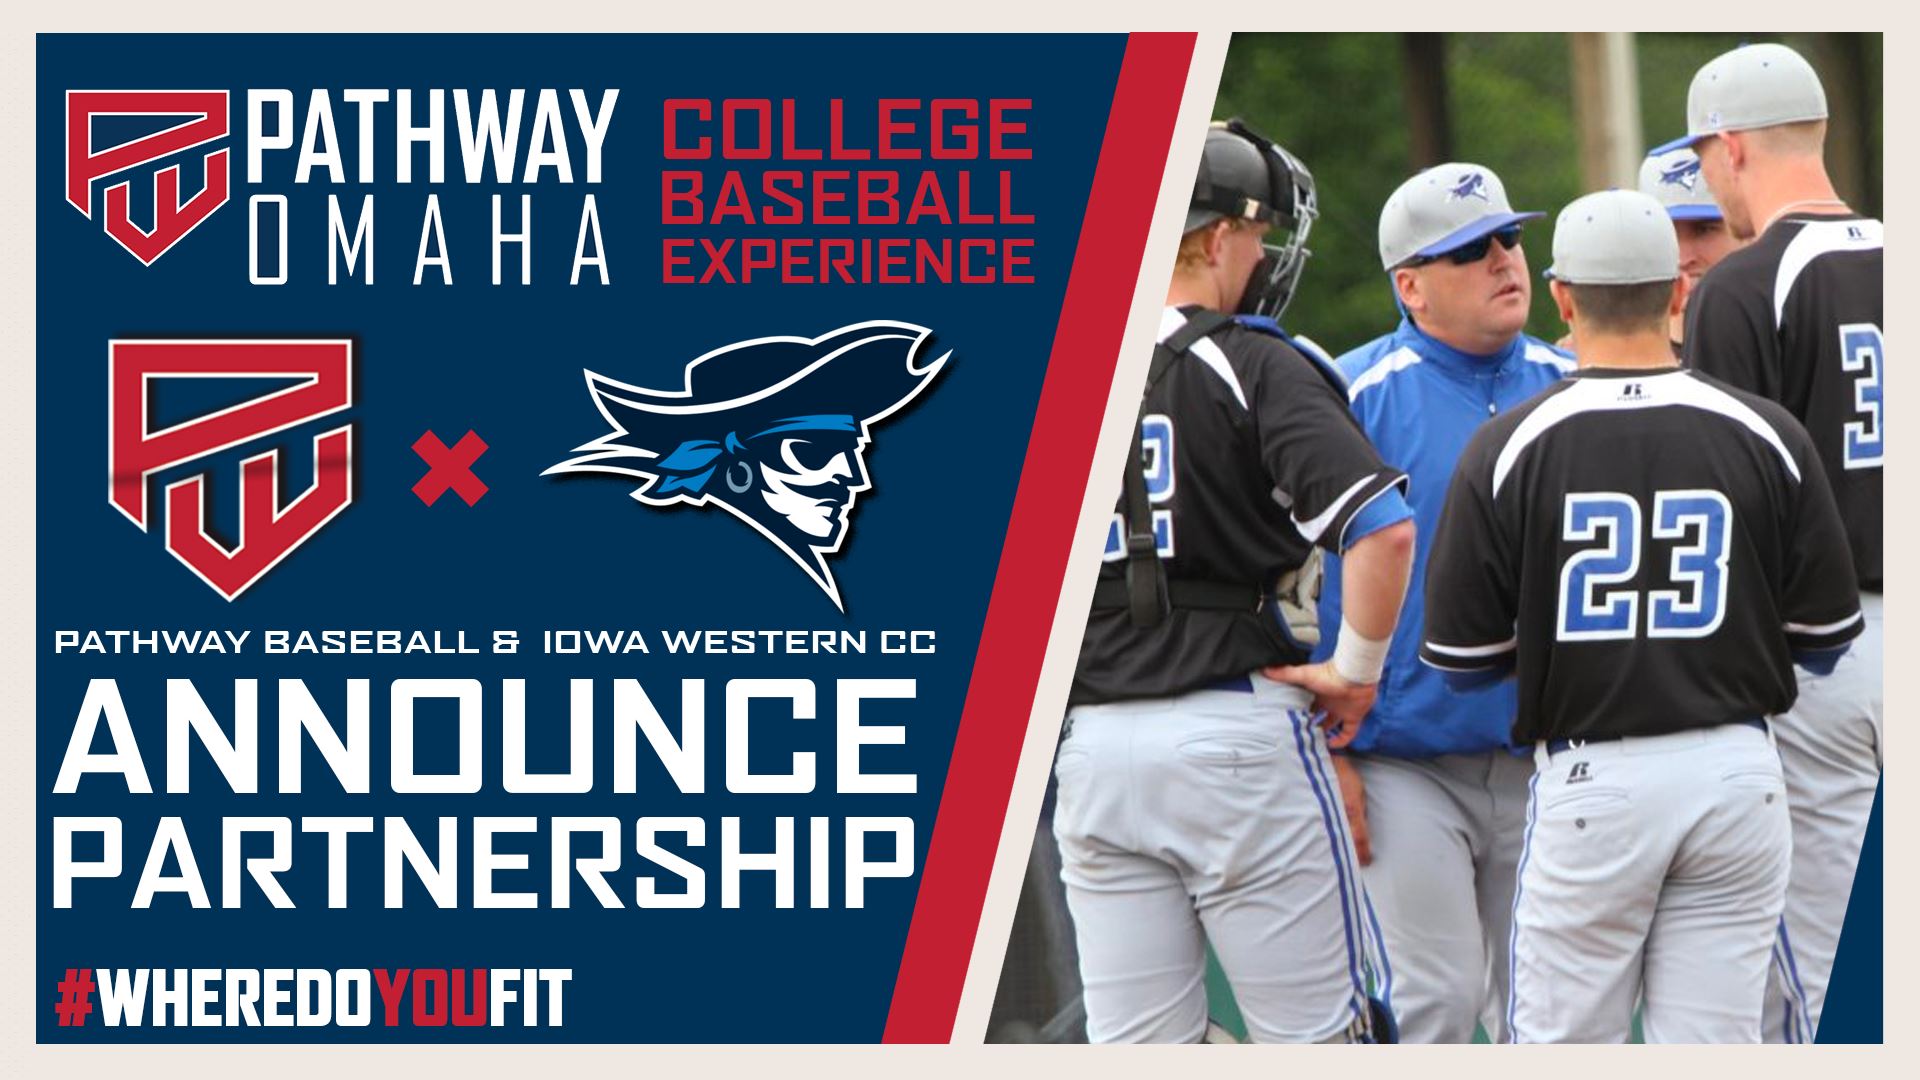 Reivers Partner with Triple Crown and Pathway Baseball to Create Pathway Omaha